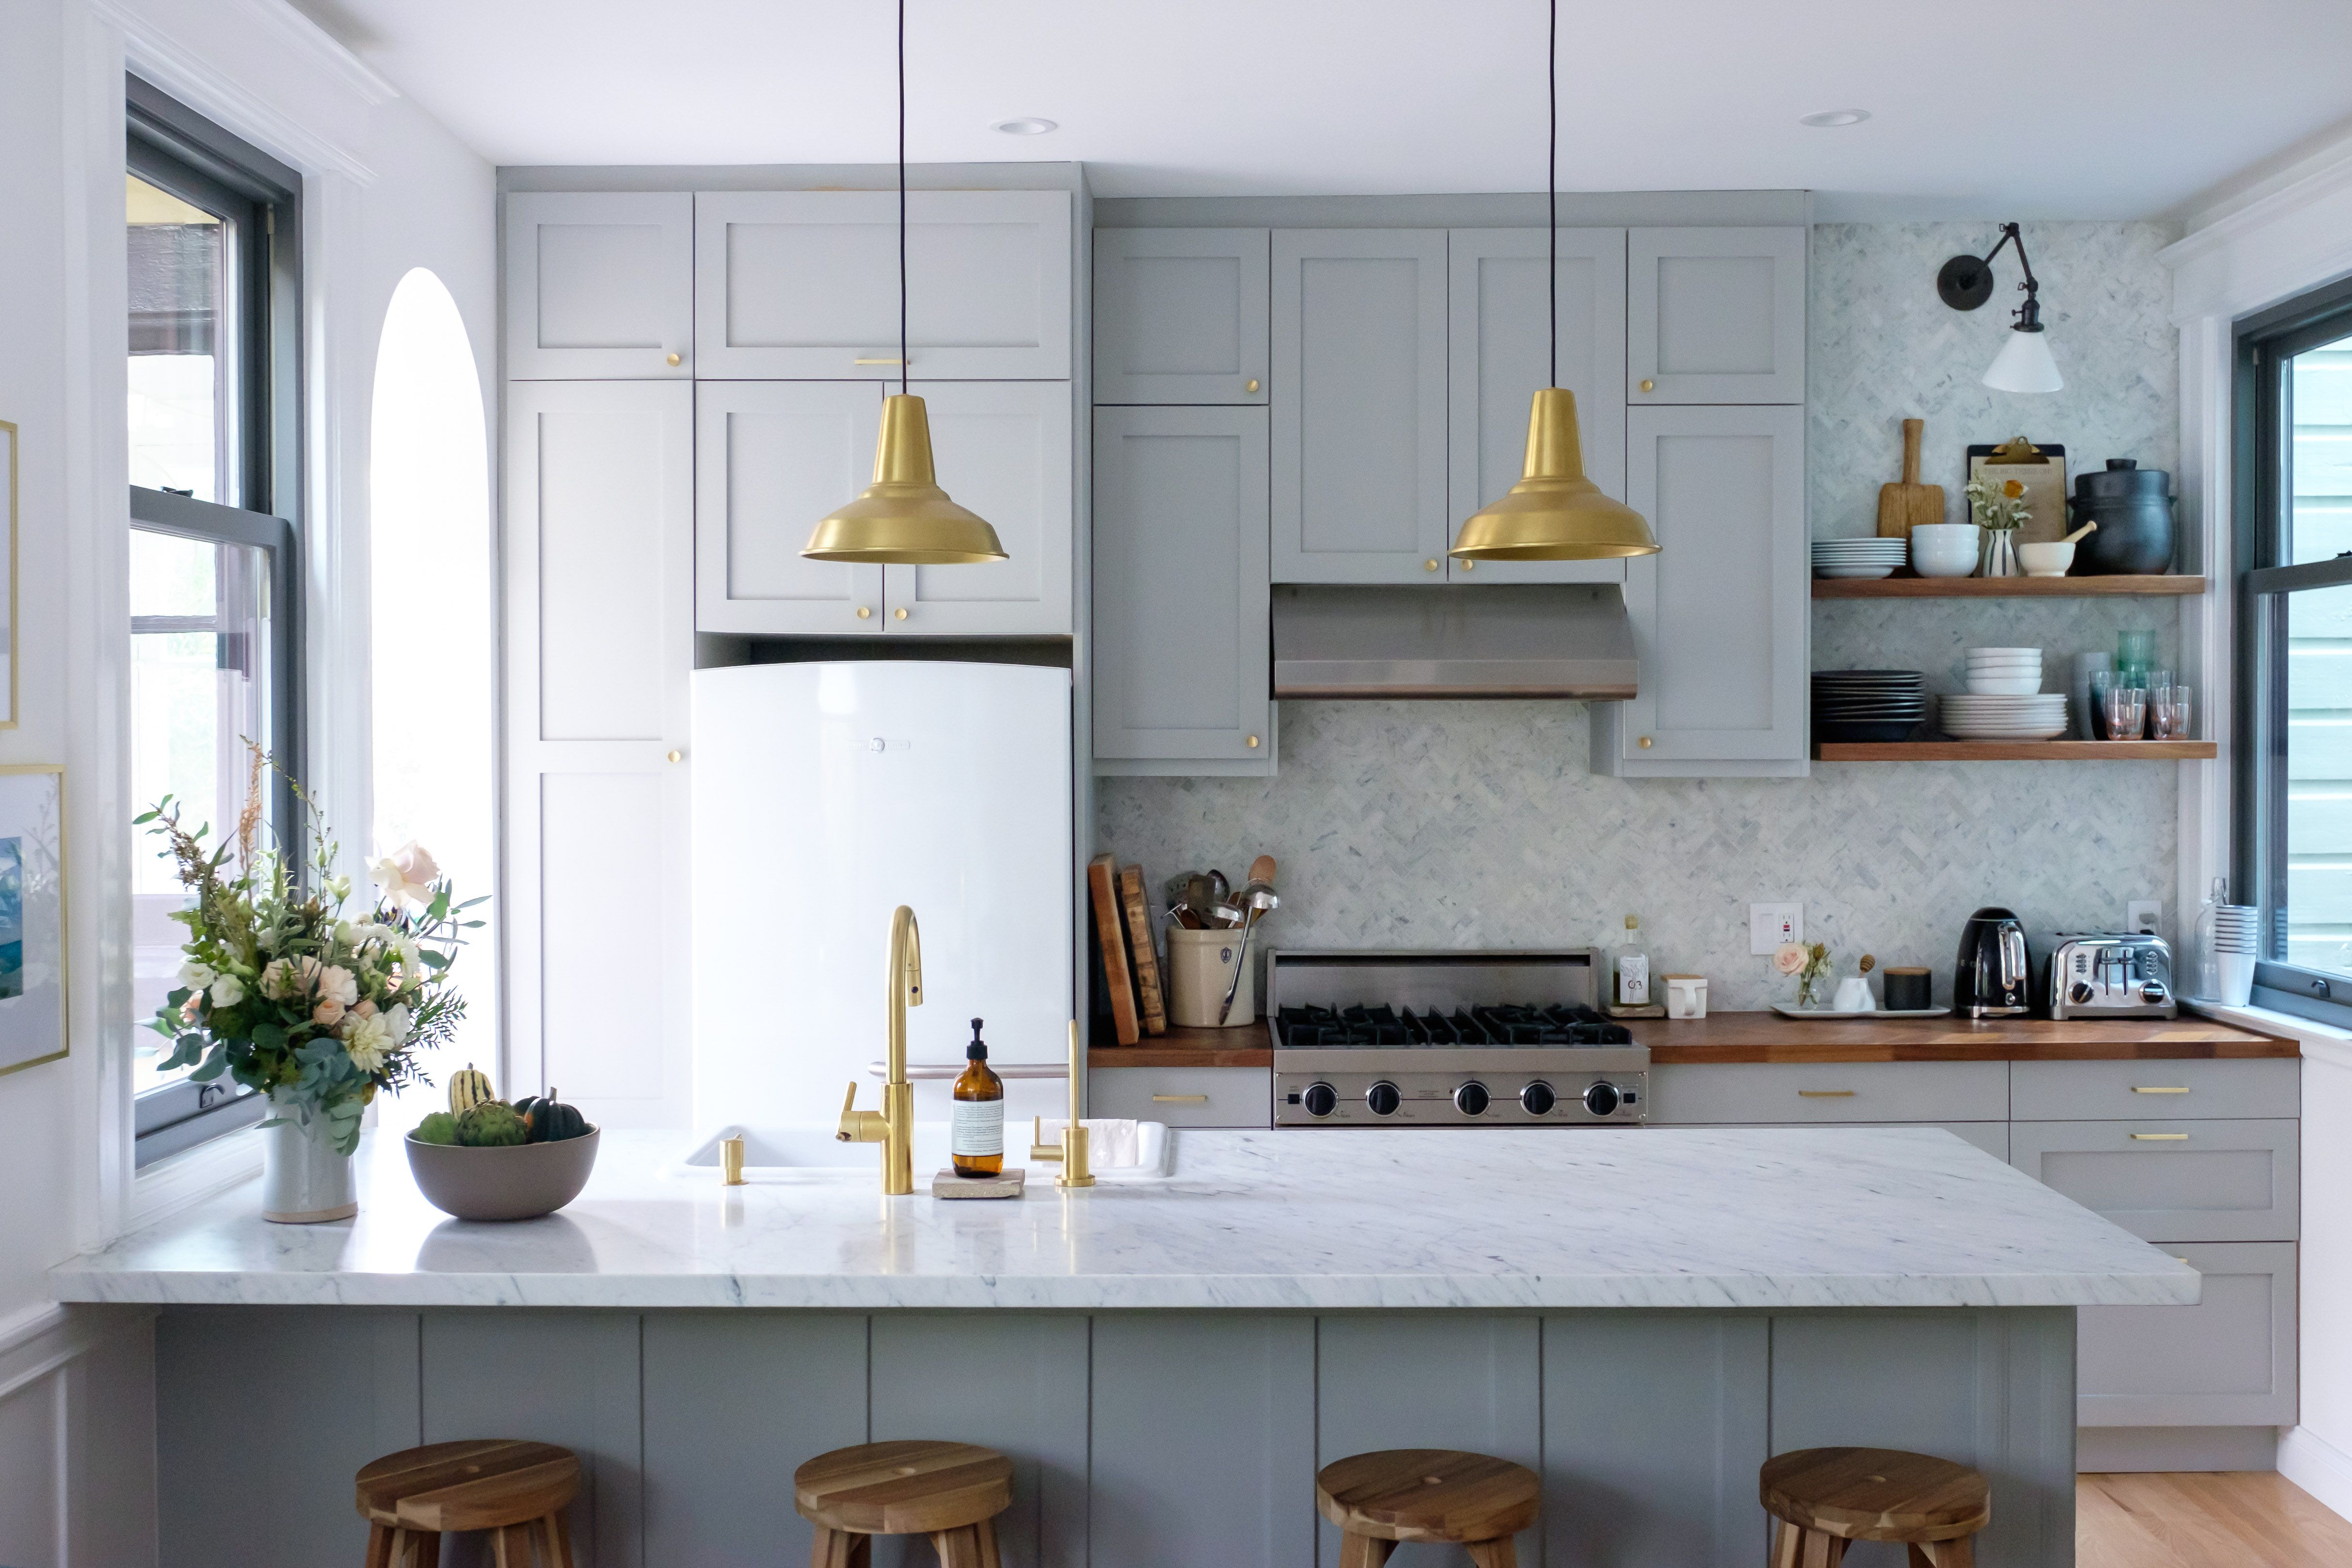 Why IKEA Are So Popular - 4 Reasons Designers Love Ikea Kitchens